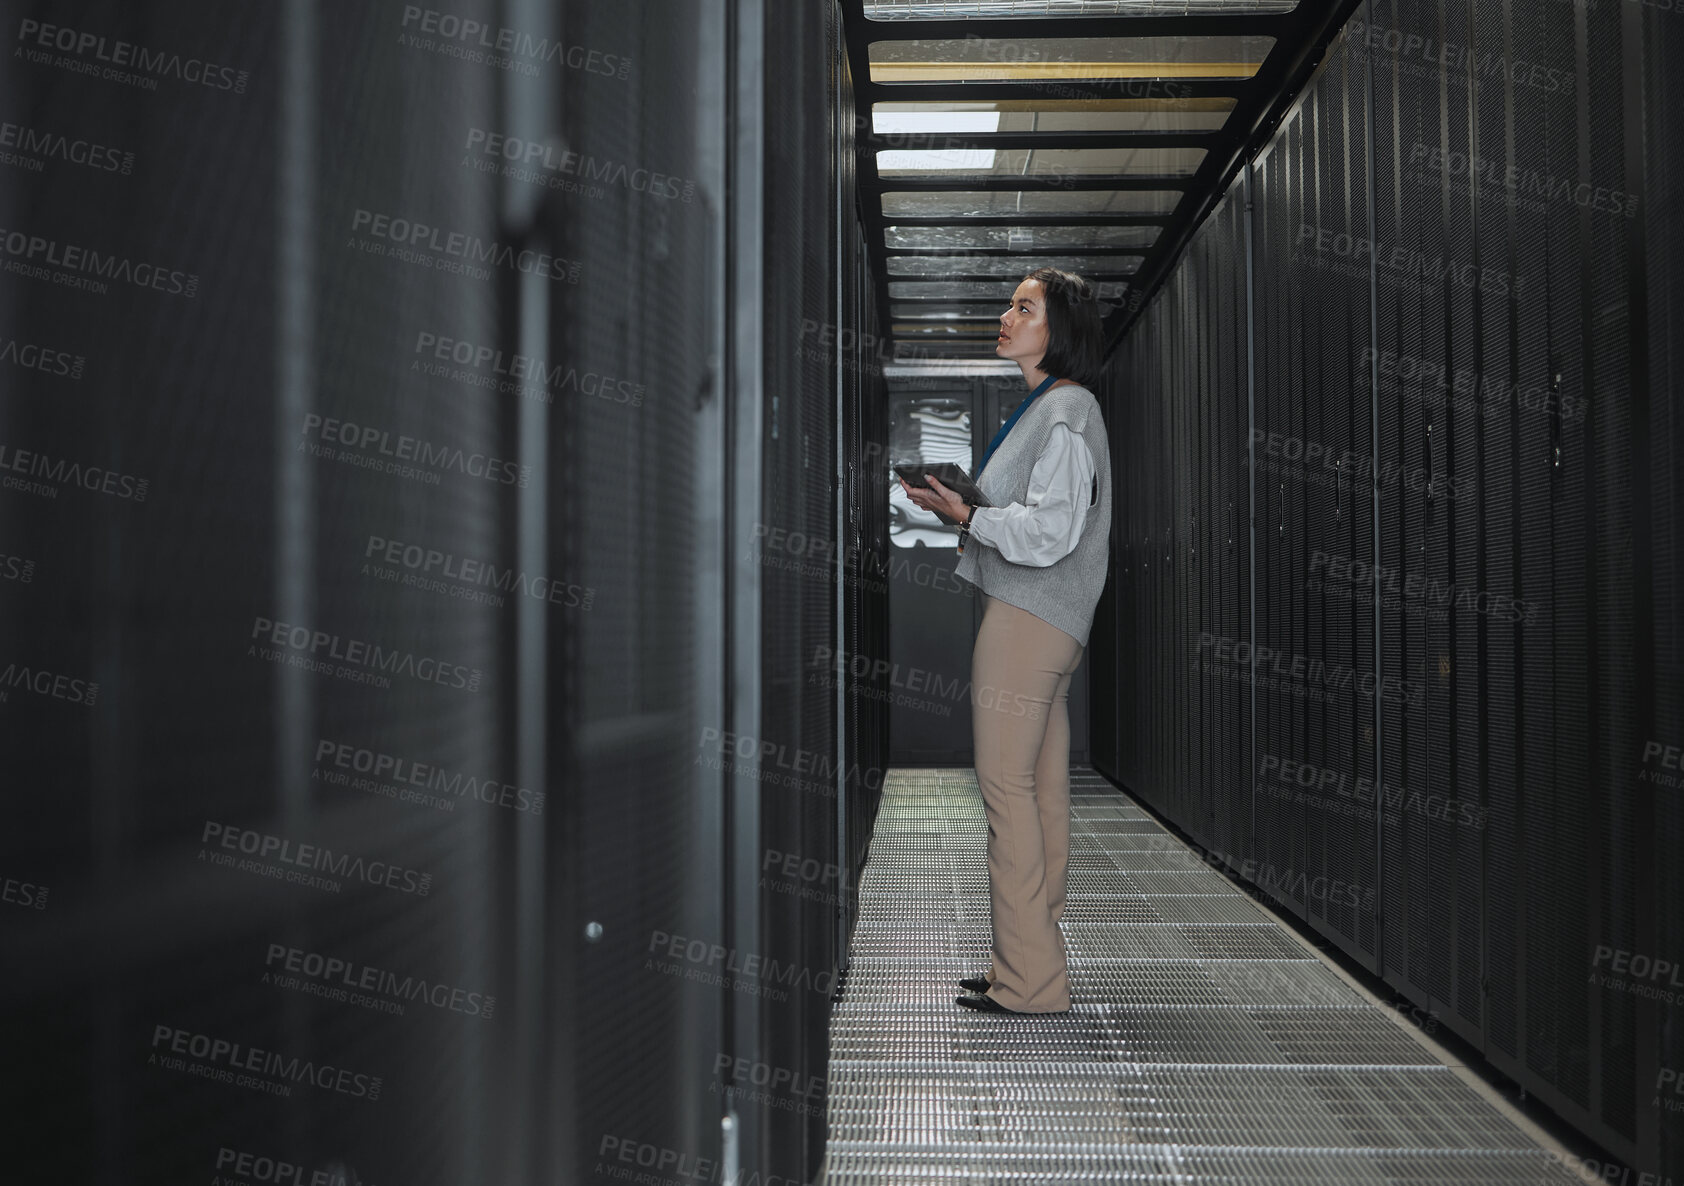 Buy stock photo Tablet, server room and storage with a programmer asian woman at work on a computer mainframe. Software, database and information technology with a female coder working alone on a cyber network